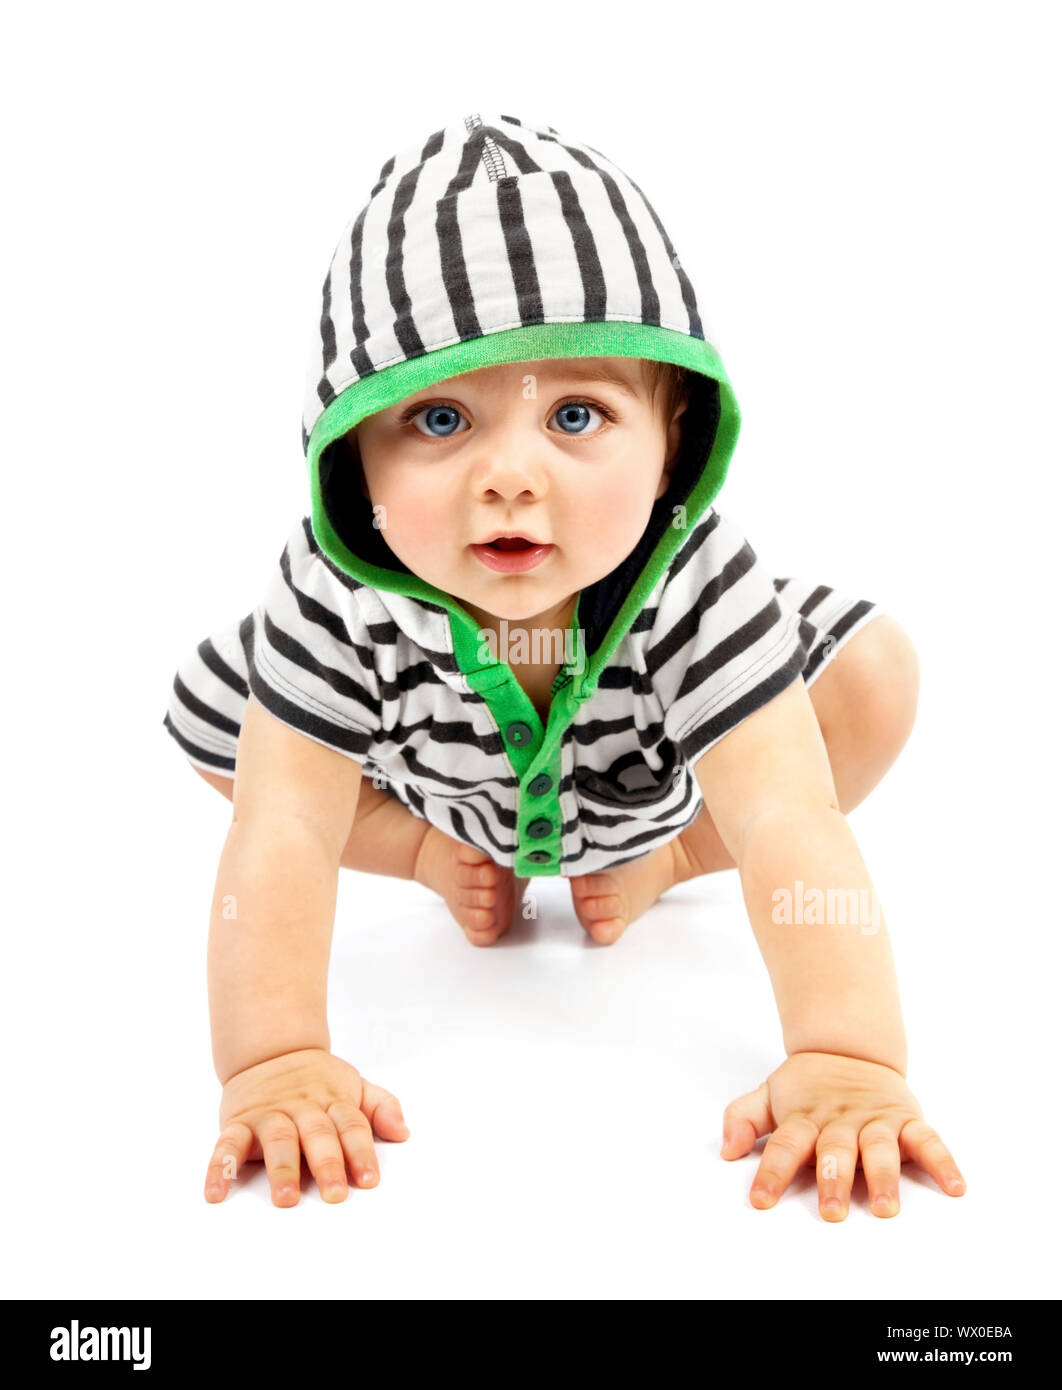 Lovely boy isolated on white background, sweet little baby wearing striped sliders, charming small kid in black & white hoodie with biggin crawling in Stock Photo